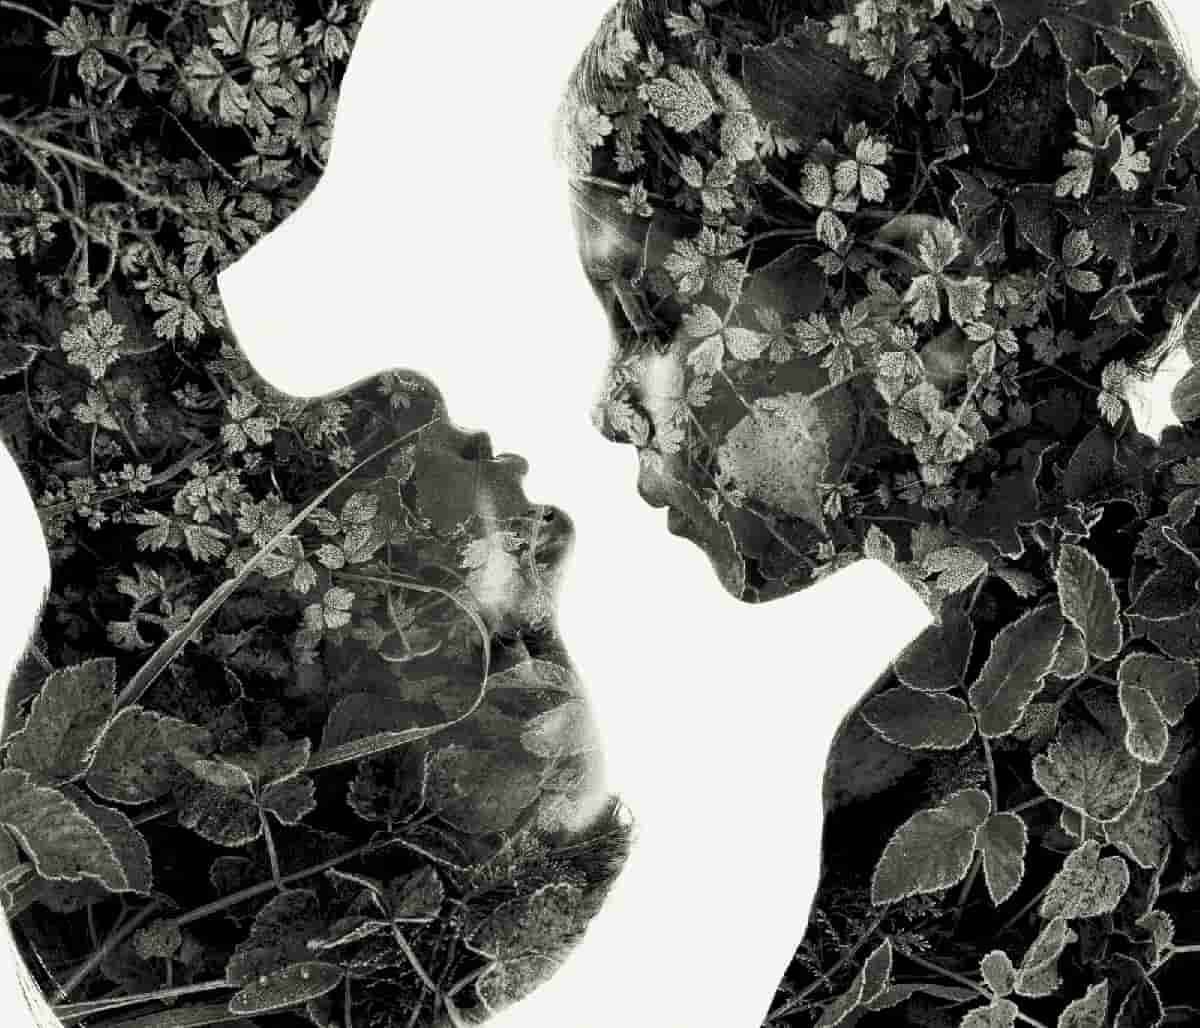 Human Subjects to the [Ongoing Coronavirus] Distorted by Nature in Double-Exposure Photographs by More of Works